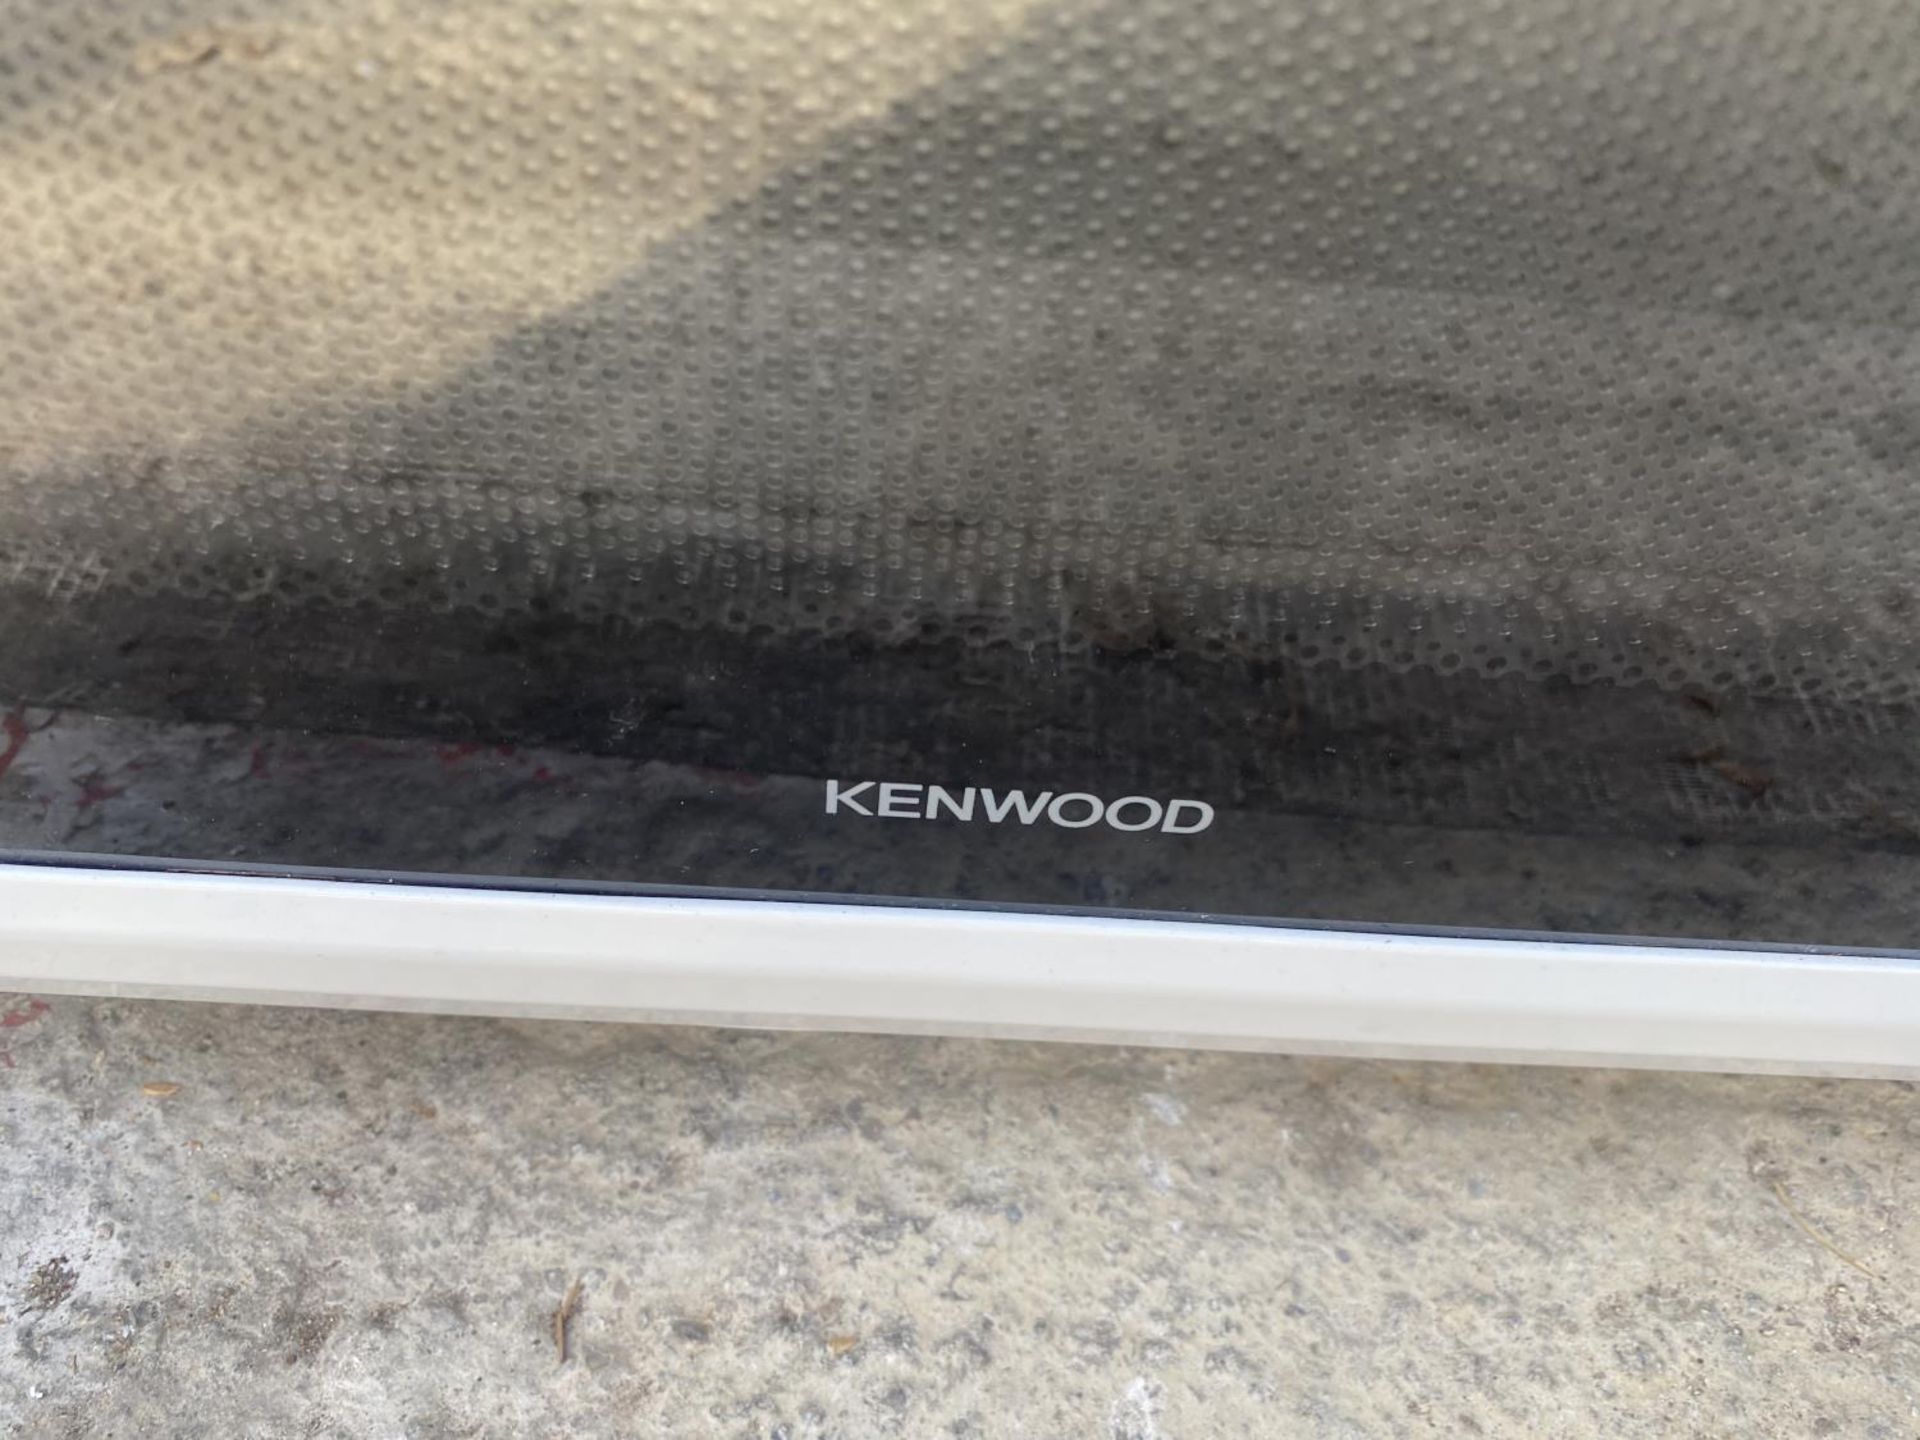 A KENWOOD MICROWAVE OVEN - Image 2 of 4